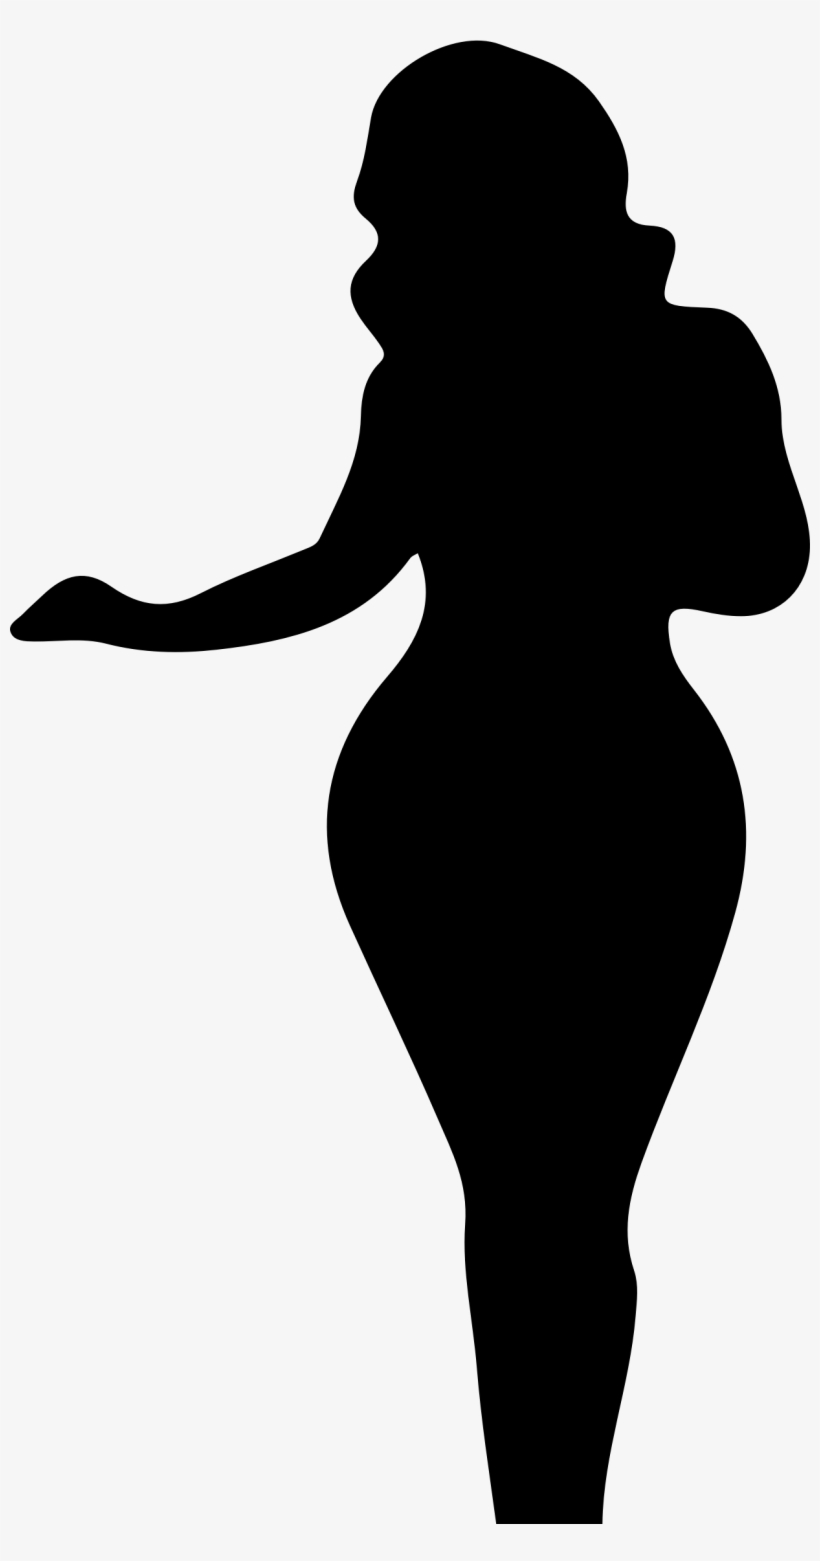 This Free Icons Png Design Of Full Figured Woman Silhouette, transparent png #169930